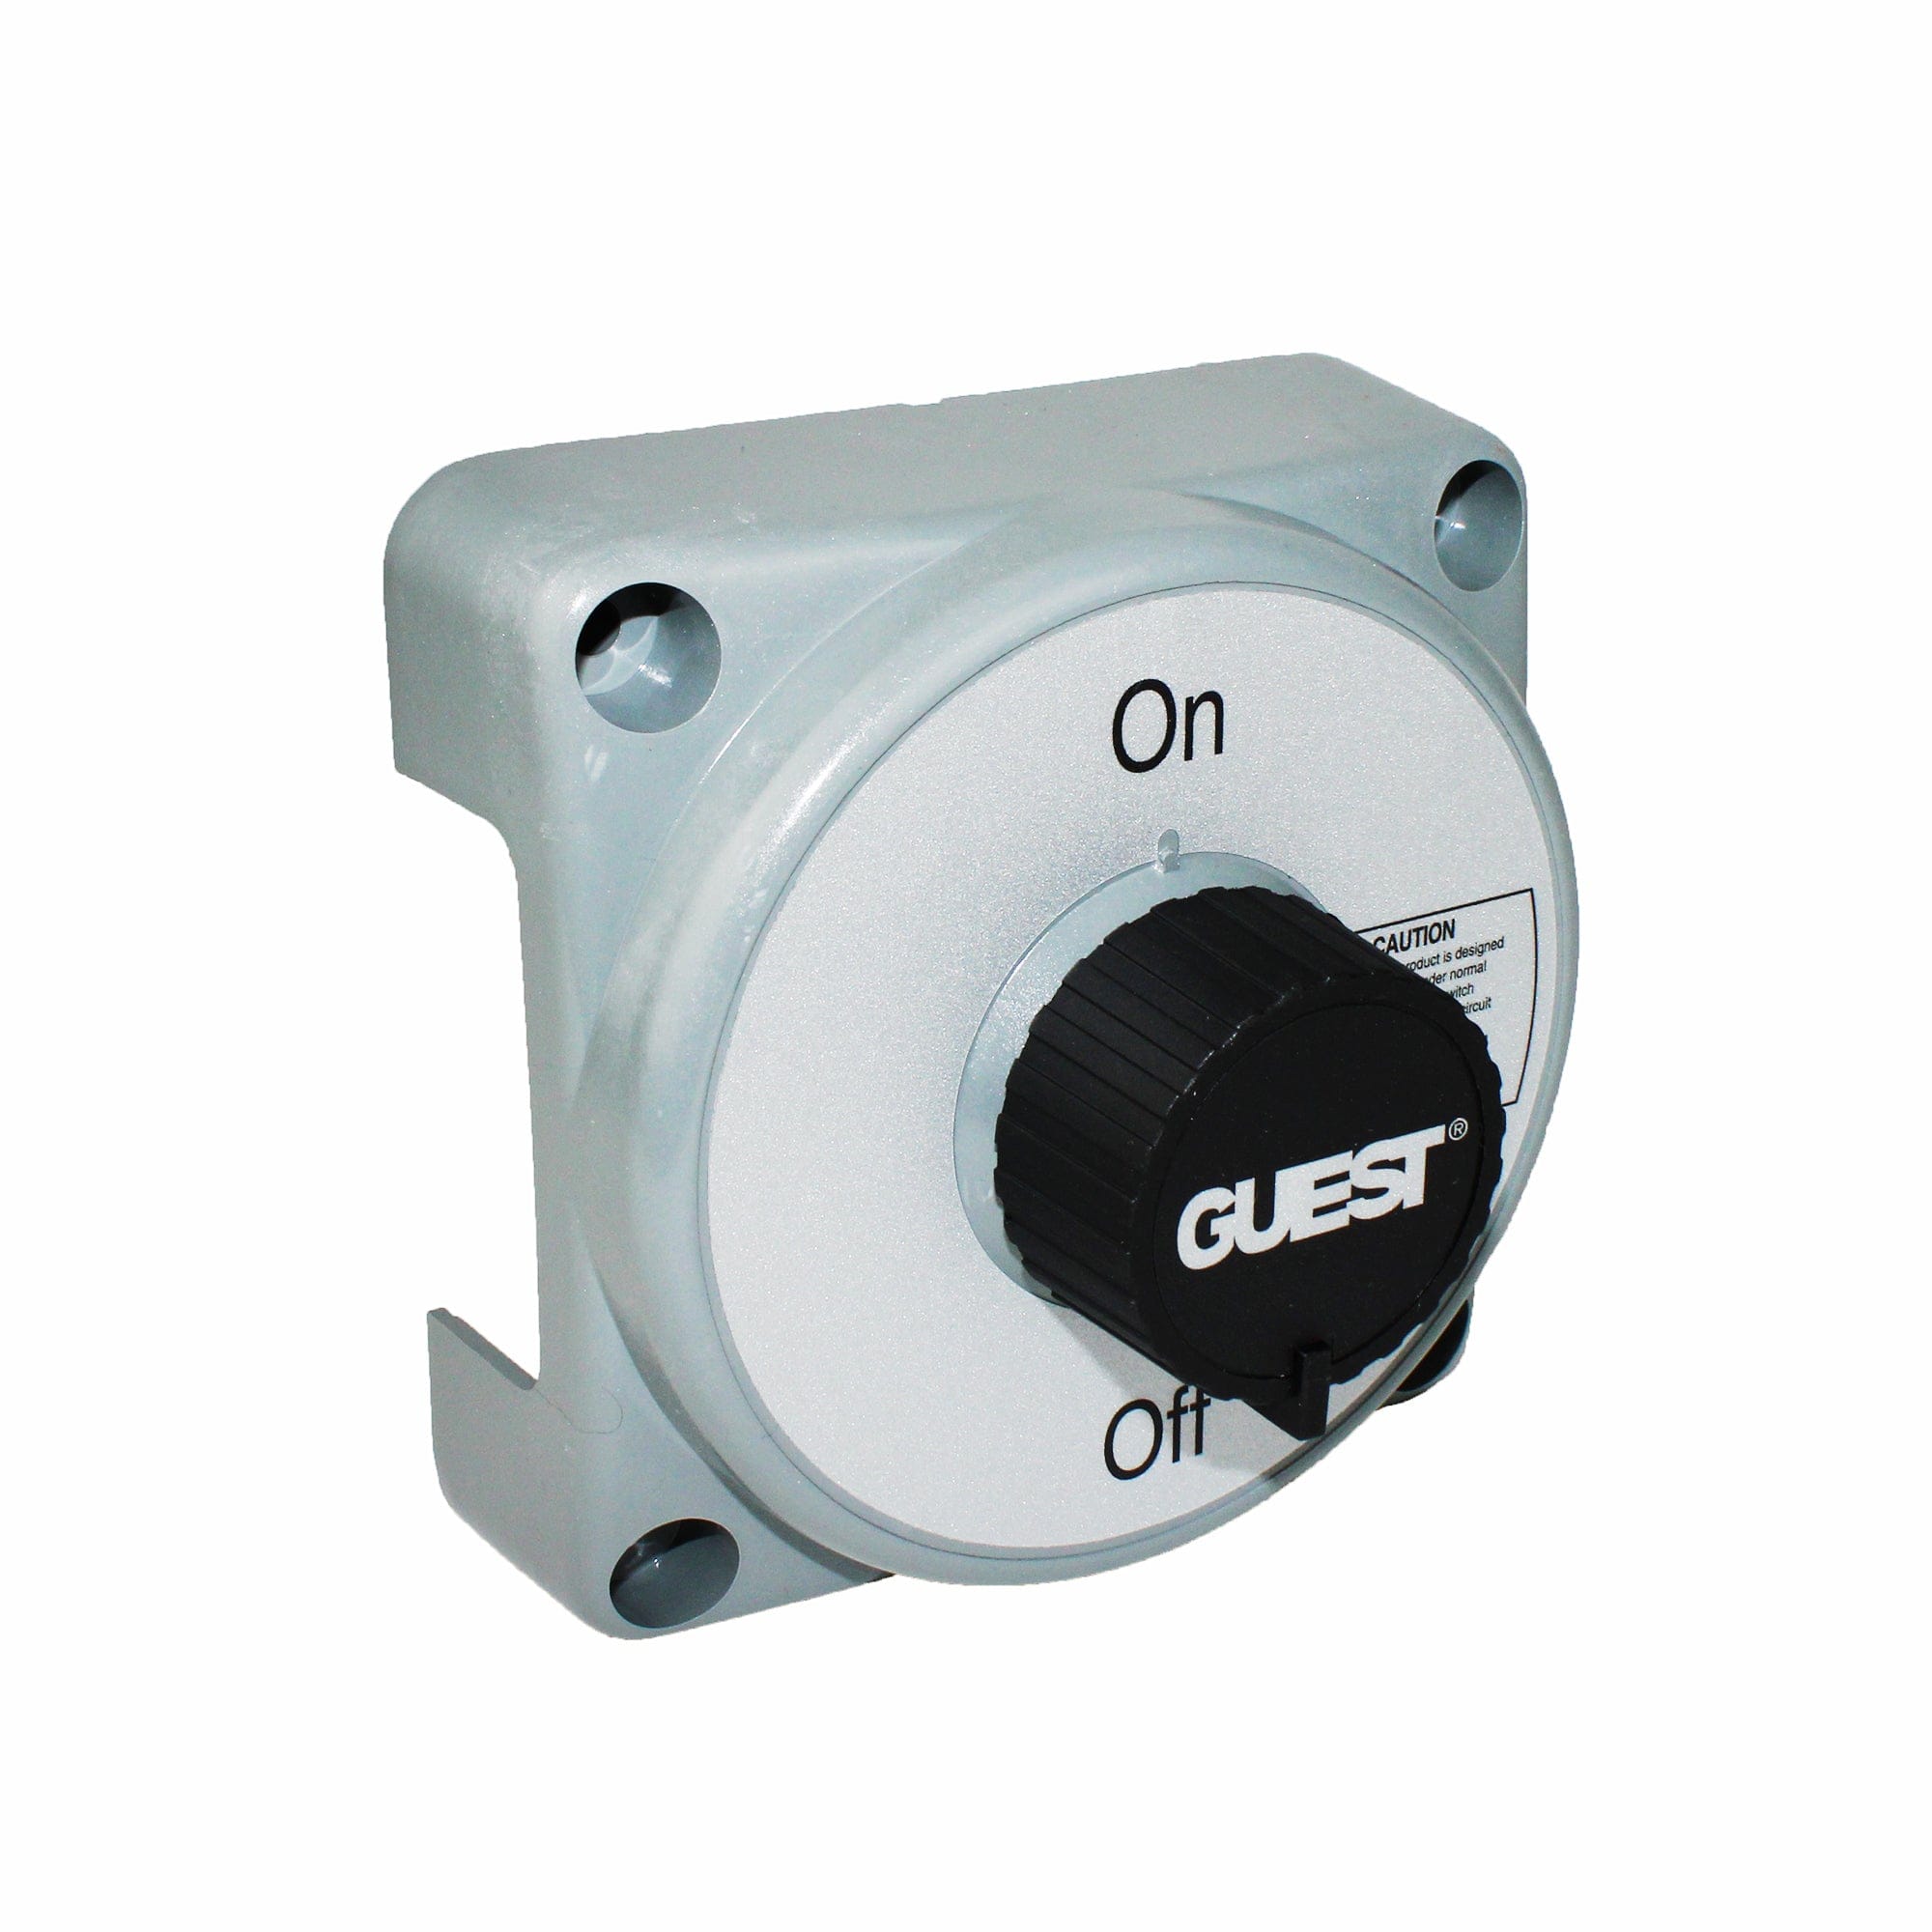 Guest 2303A Heavy-Duty On/Off Diesel Power Battery Switch with AFD